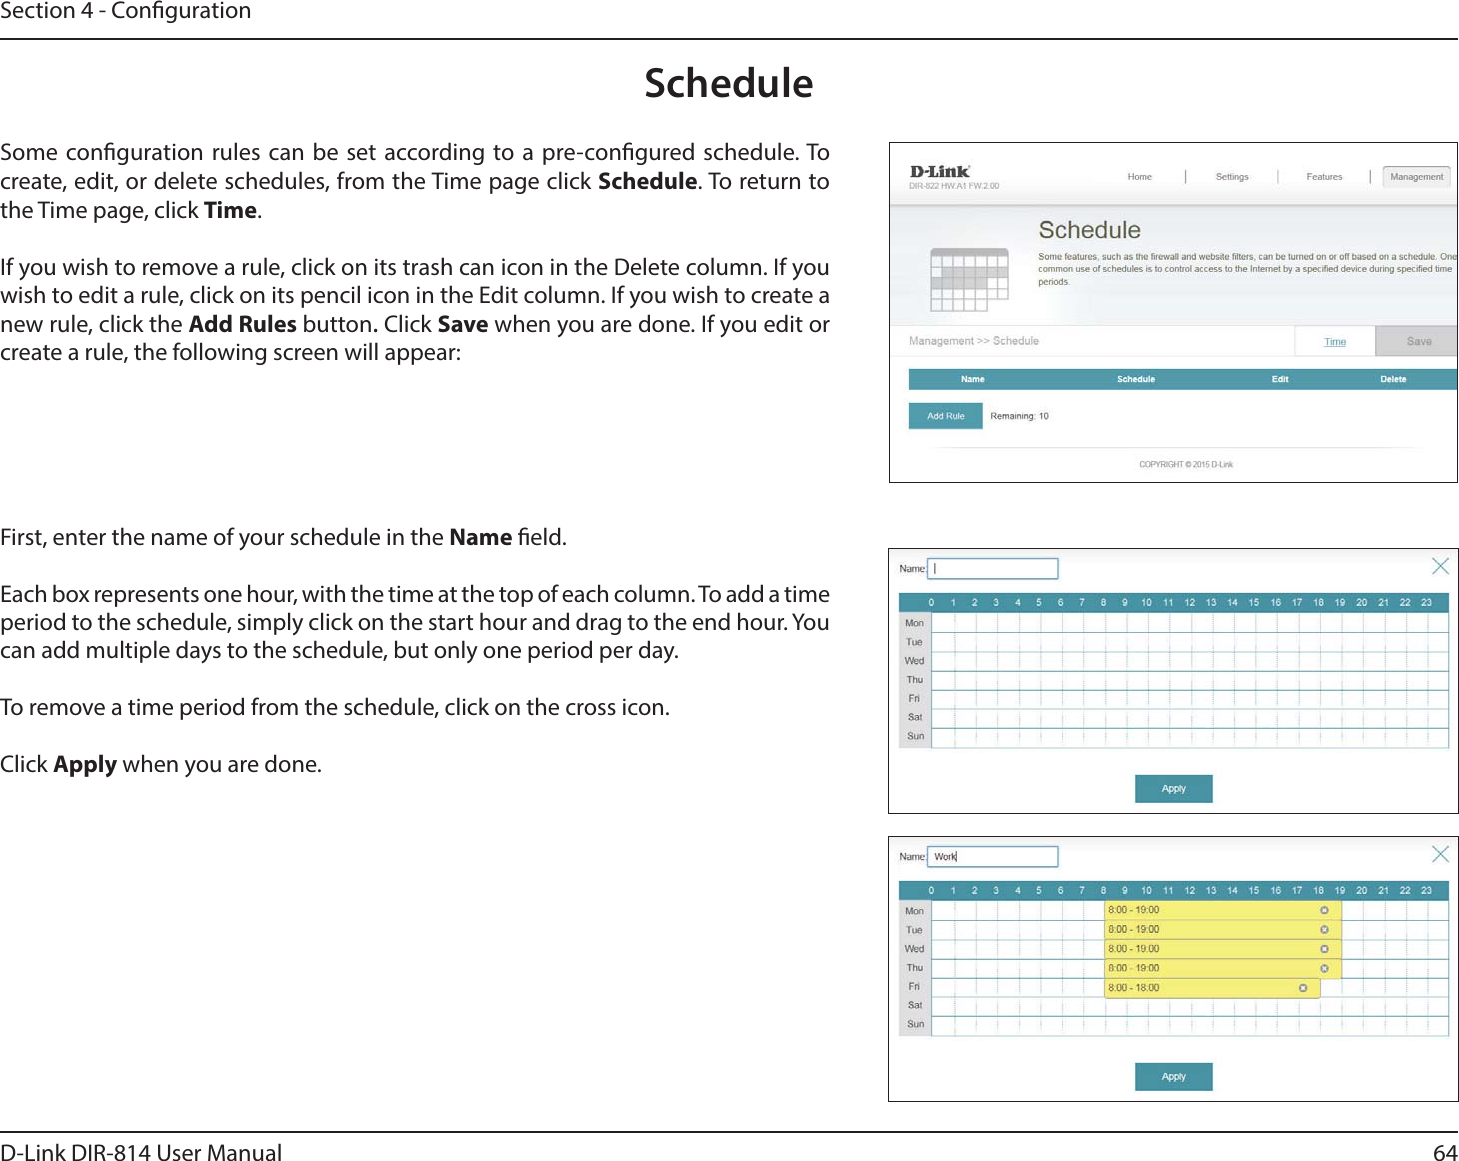 64D-Link DIR-814 User ManualSection 4 - CongurationScheduleSome conguration rules can be set according to a pre-congured schedule. To create, edit, or delete schedules, from the Time page click Schedule. To return to the Time page, click Time. If you wish to remove a rule, click on its trash can icon in the Delete column. If you wish to edit a rule, click on its pencil icon in the Edit column. If you wish to create a new rule, click the Add Rules button. Click Save when you are done. If you edit or create a rule, the following screen will appear:First, enter the name of your schedule in the Name eld.Each box represents one hour, with the time at the top of each column. To add a time period to the schedule, simply click on the start hour and drag to the end hour. You can add multiple days to the schedule, but only one period per day.To remove a time period from the schedule, click on the cross icon.Click Apply when you are done.